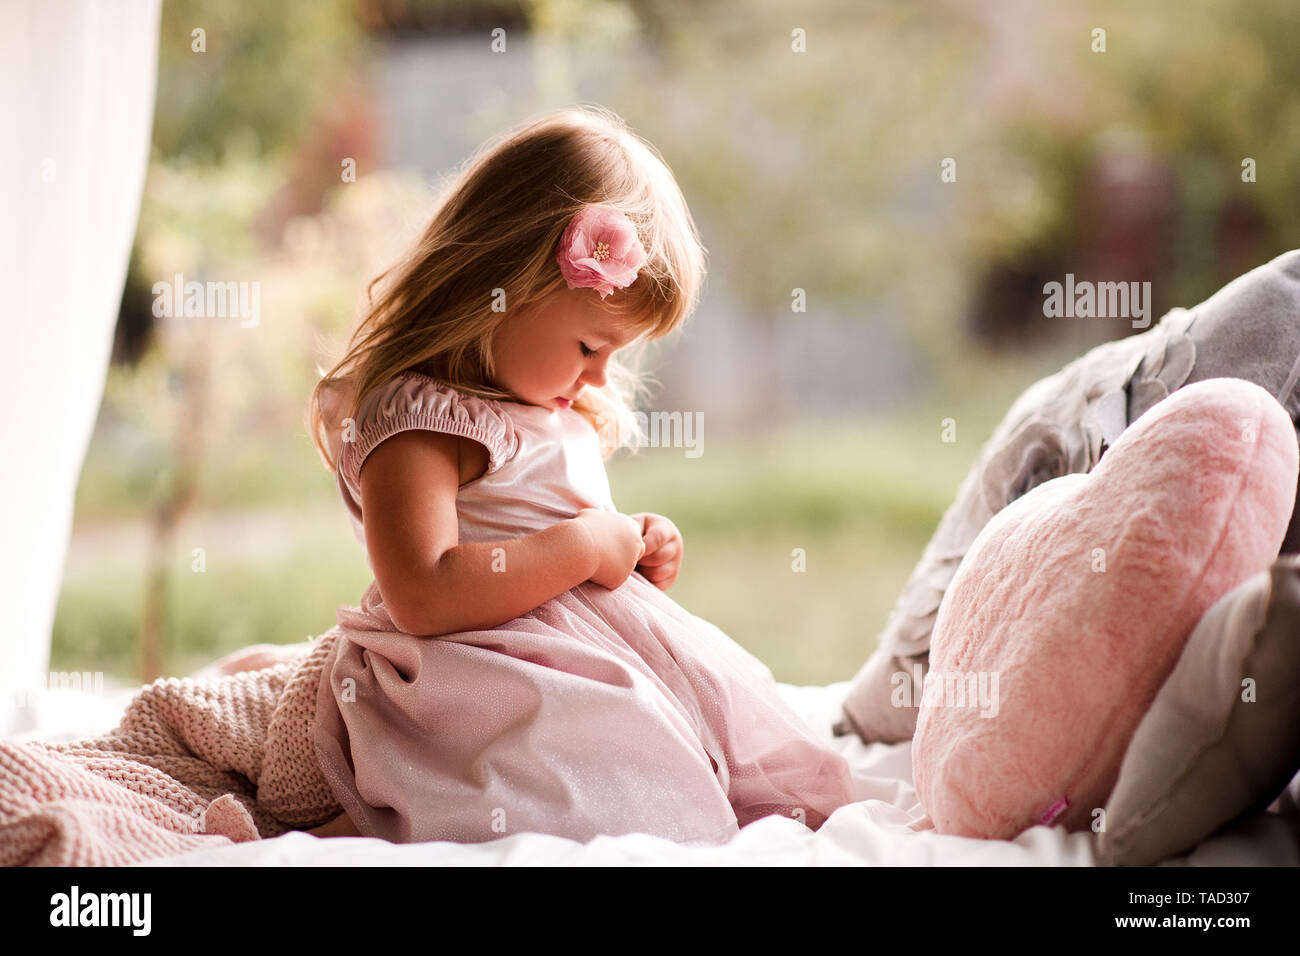 Cute baby girl 2-3 year old wearing stylish princess dress sitting in bed with pillows outdoors. Stock Photo